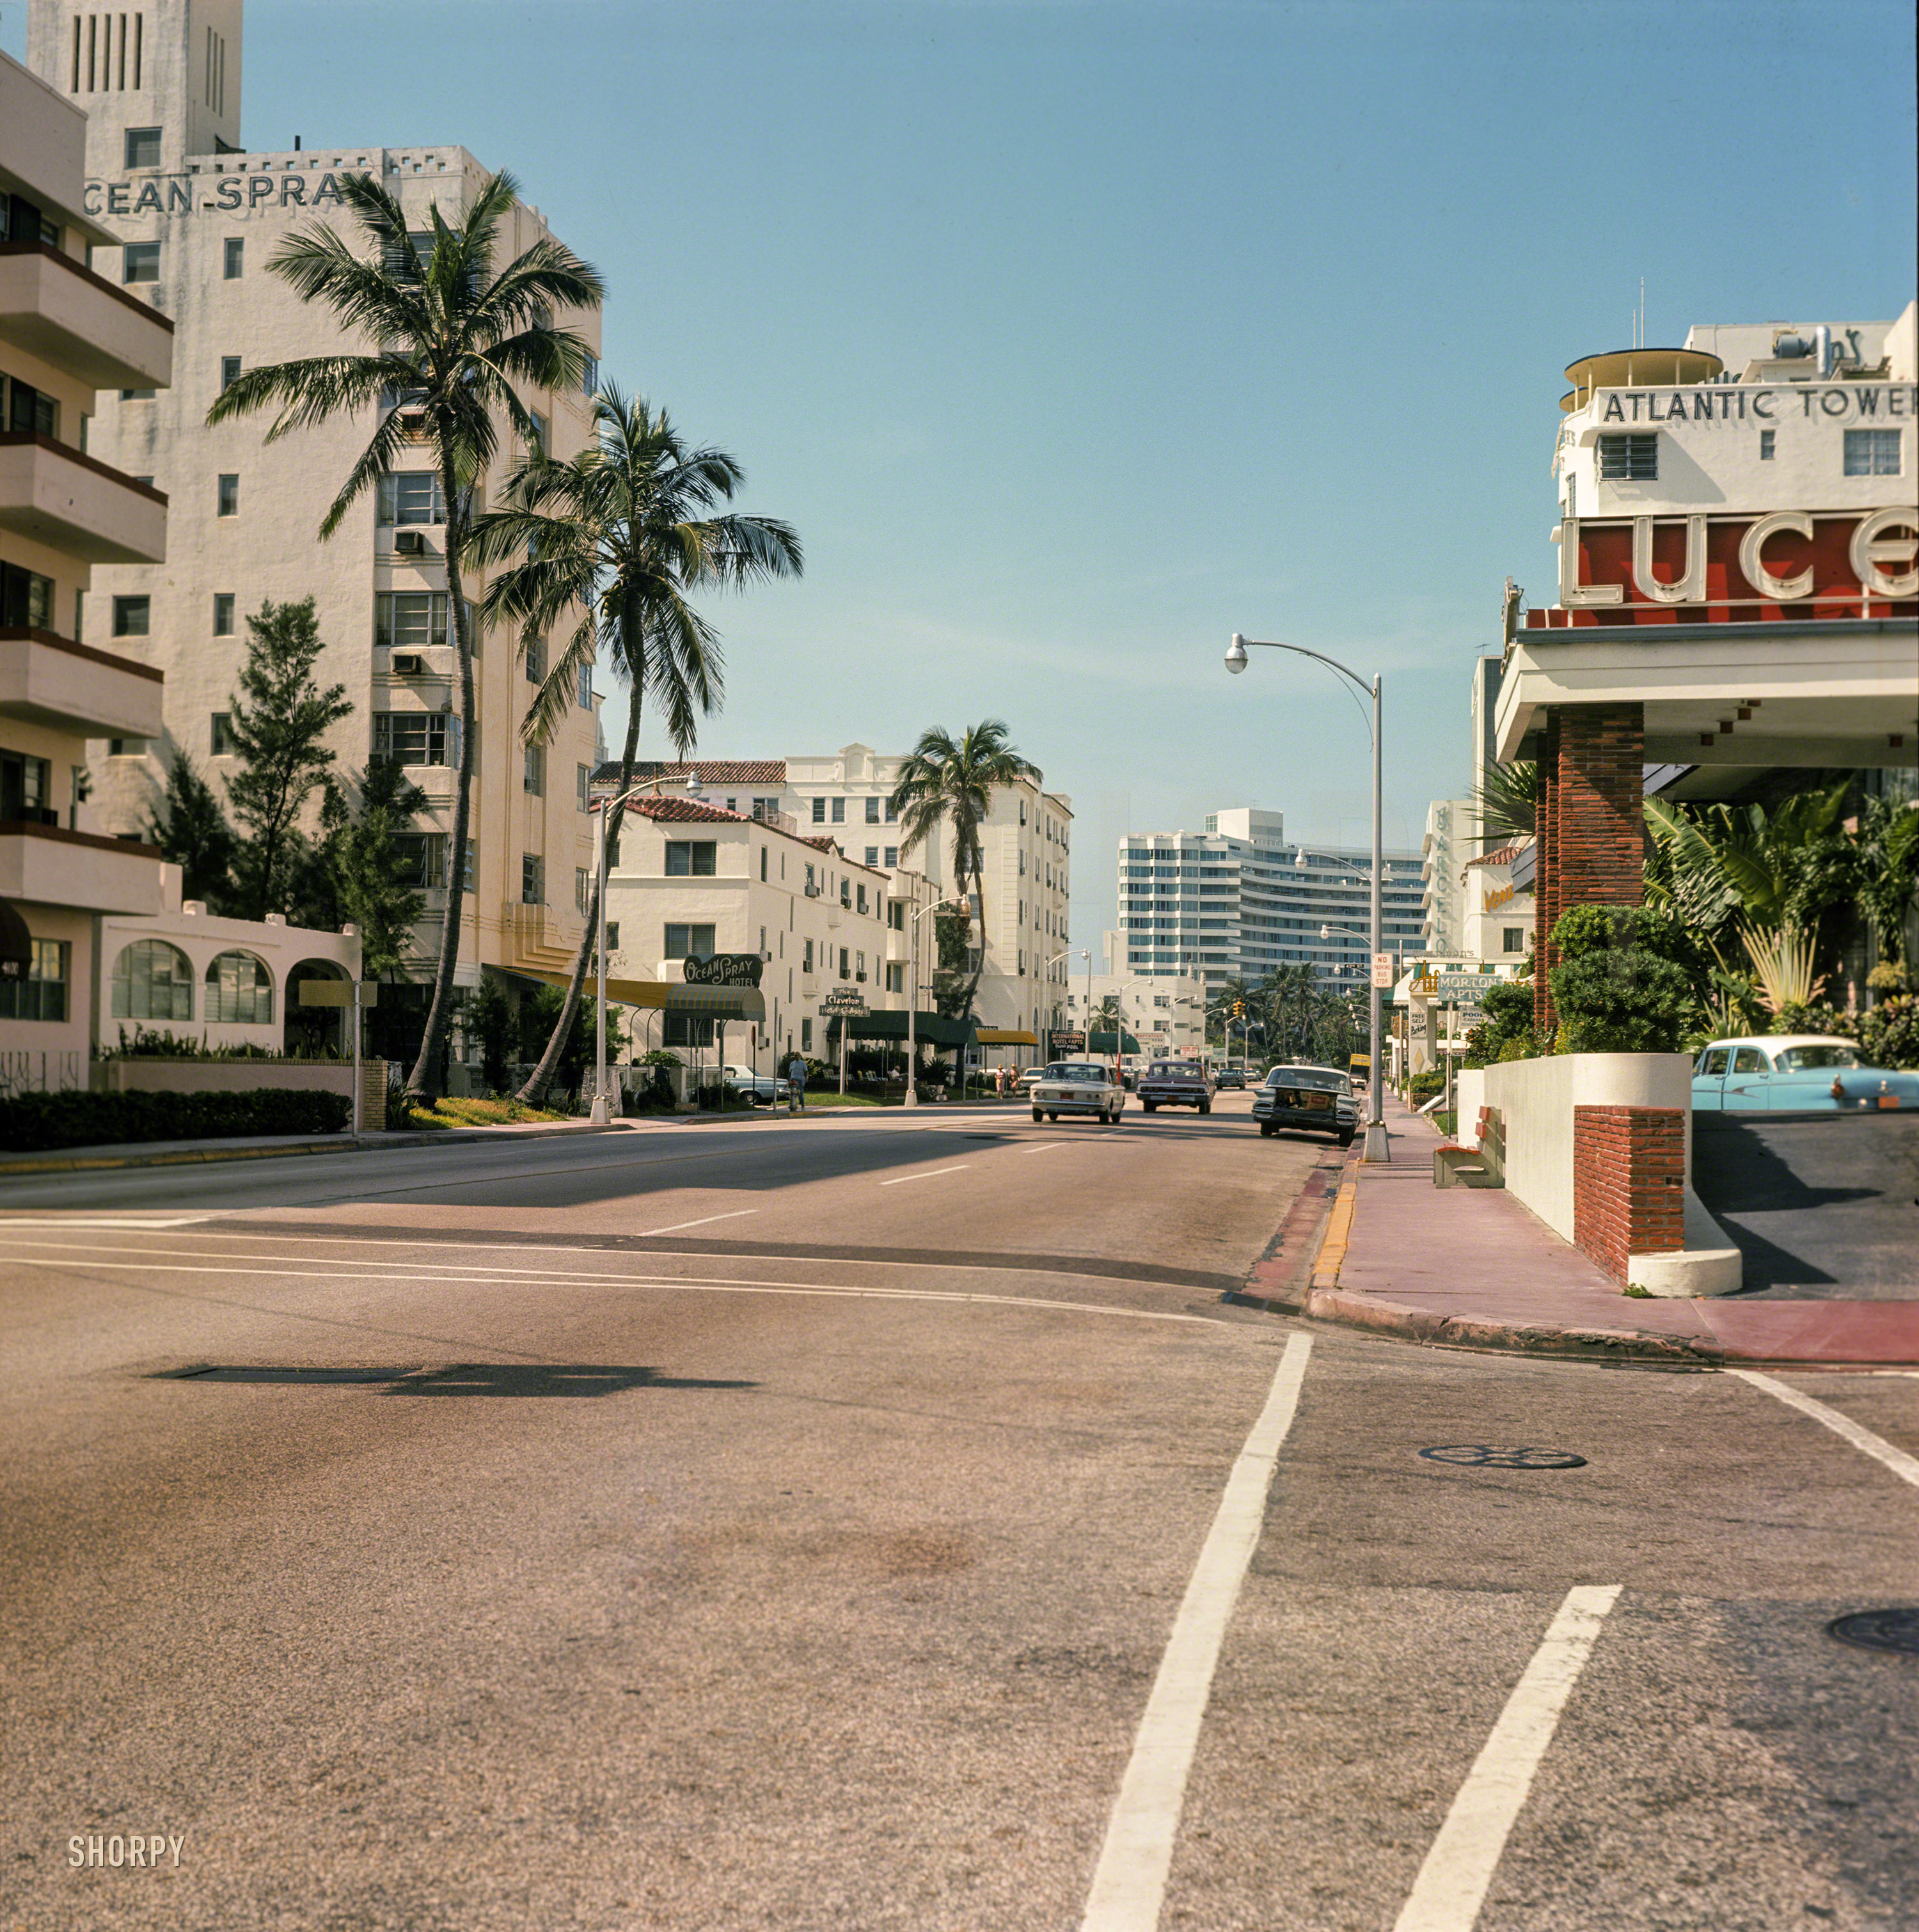 1964. "Collins Avenue, Miami Beach." With the Ocean Spray Hotel representing the Art Deco old guard and the curvy Fontainebleau the new. Medium format slide snatched from the jaws of eBay and scanned by Shorpy. View full size.